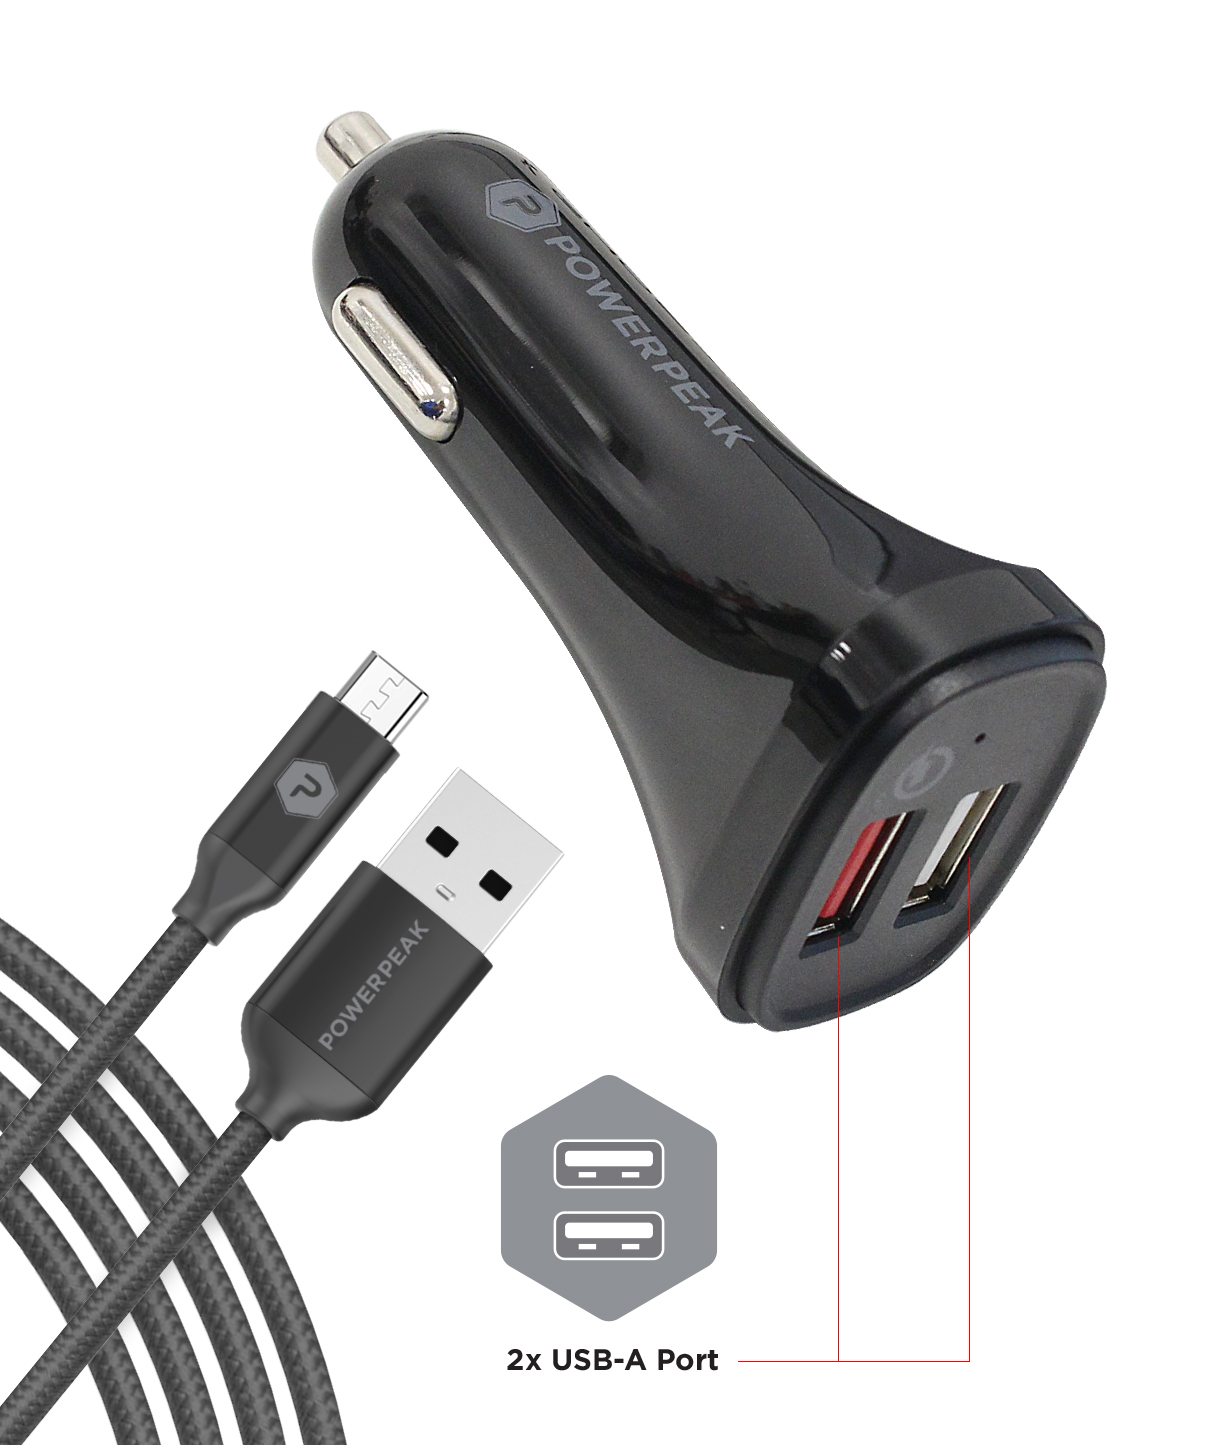 Fast black car charger with 2 USB-A port. Included 4ft braided Micro-USB cable